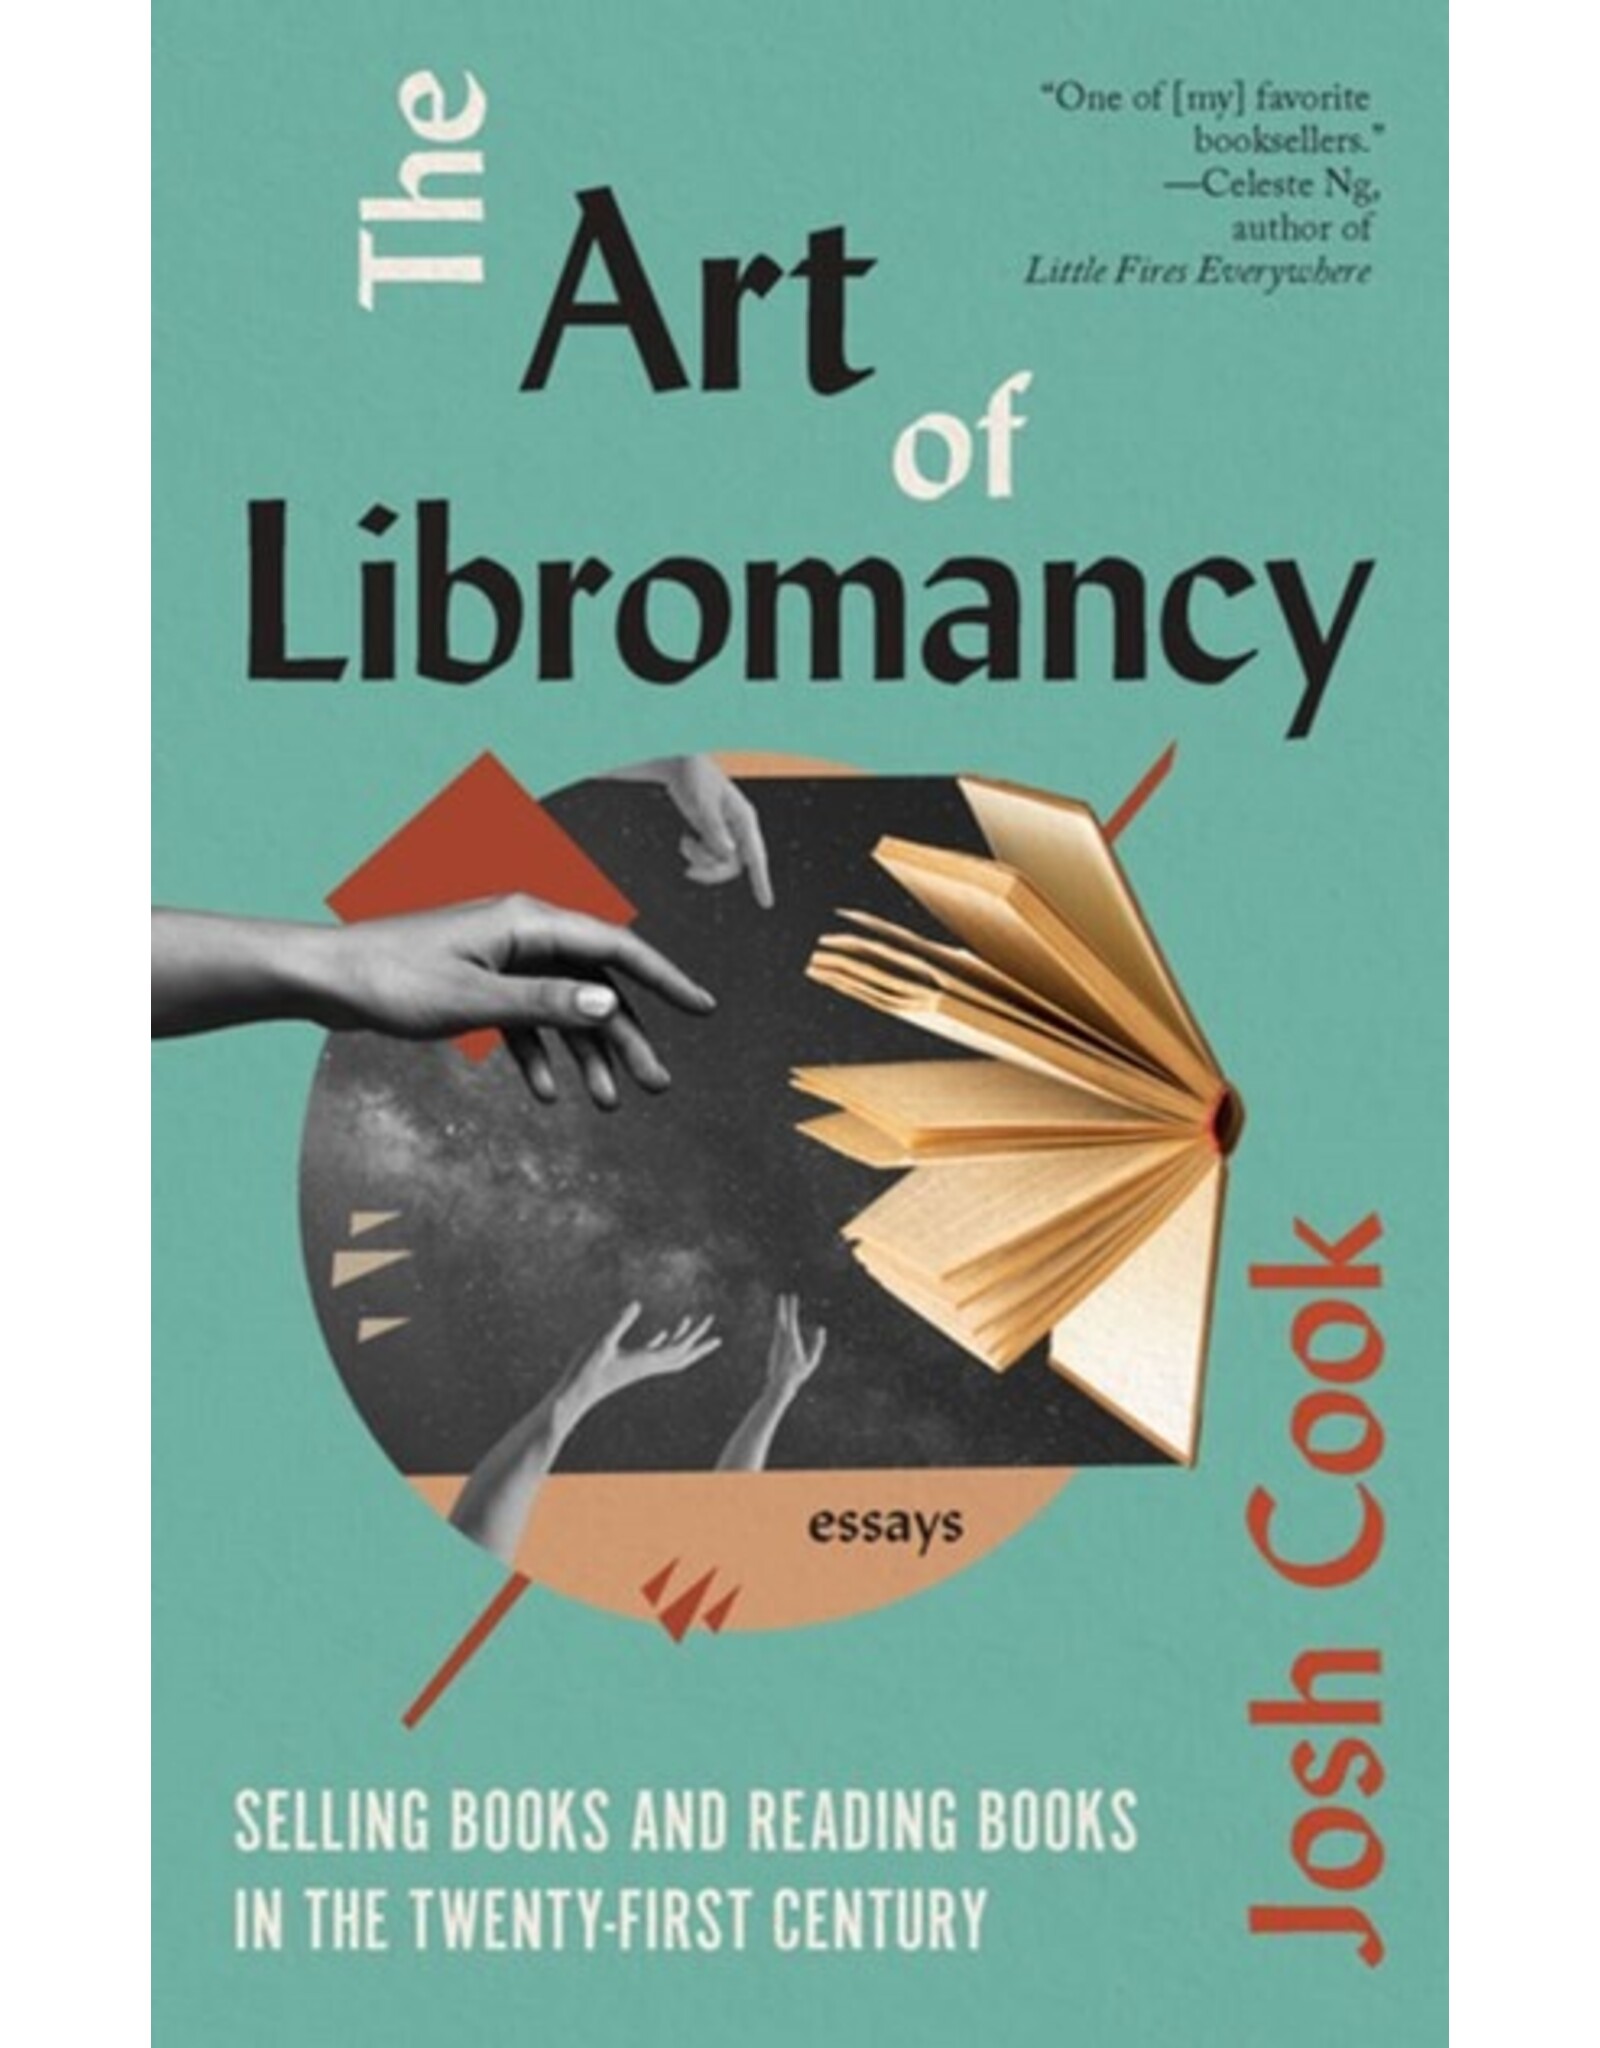 Books The Art of Libromancy: Selling Books and Reading Books in the Twenty-First Century  by Josh Cook